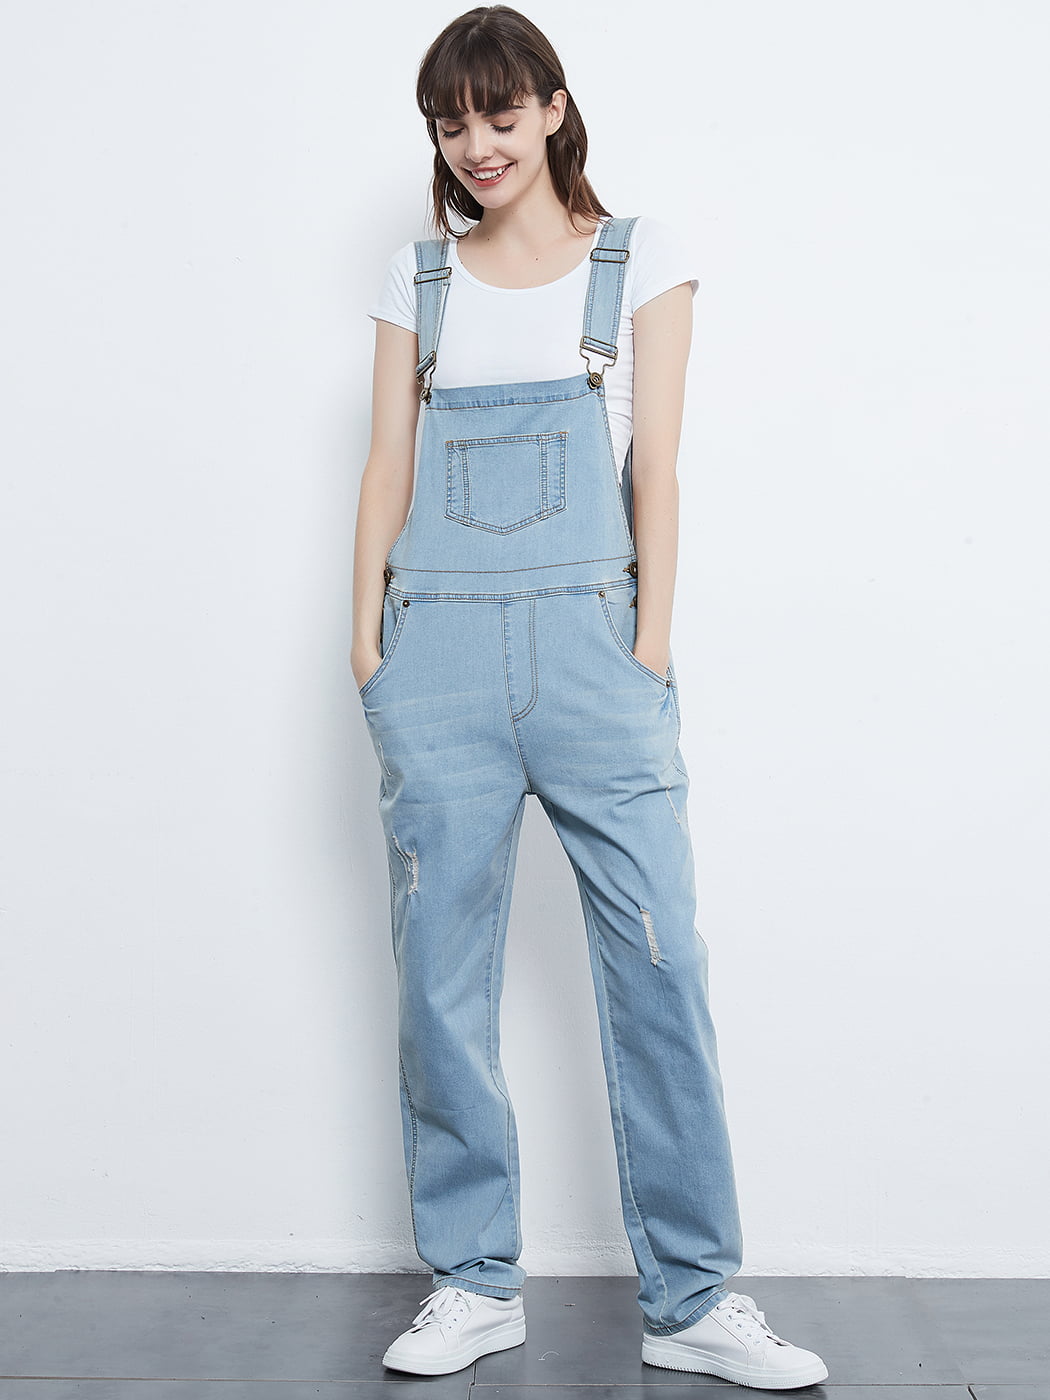 Esast Womens Classic Vintage Pockets Straight-Legs Oversized Wash Cotton Overalls 